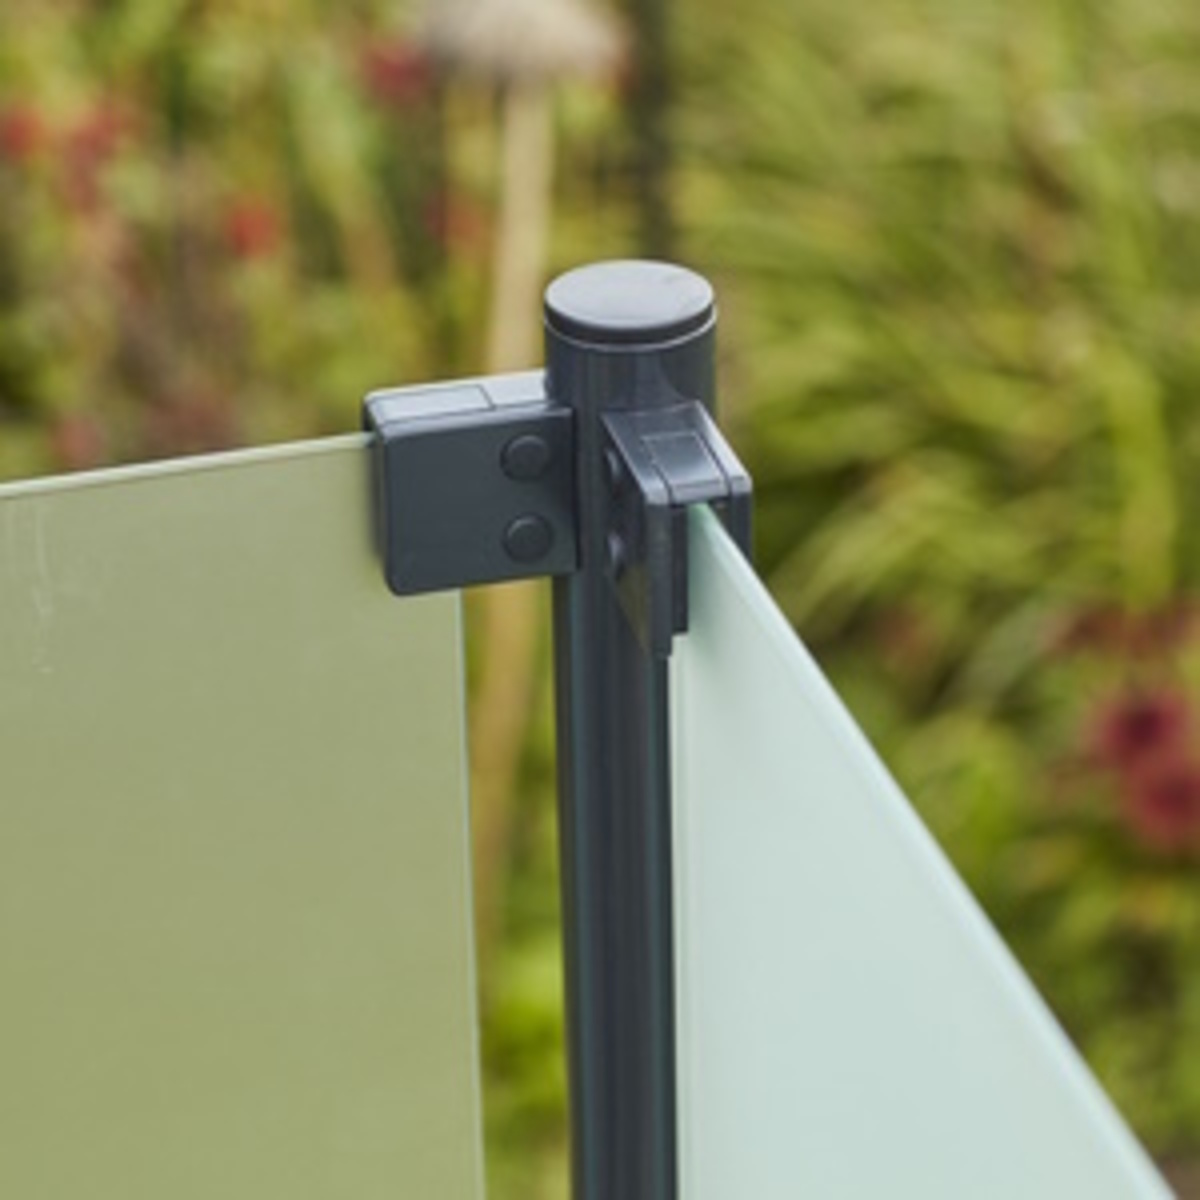 Steel poles for balcony railings, balustrades or as metal fence posts